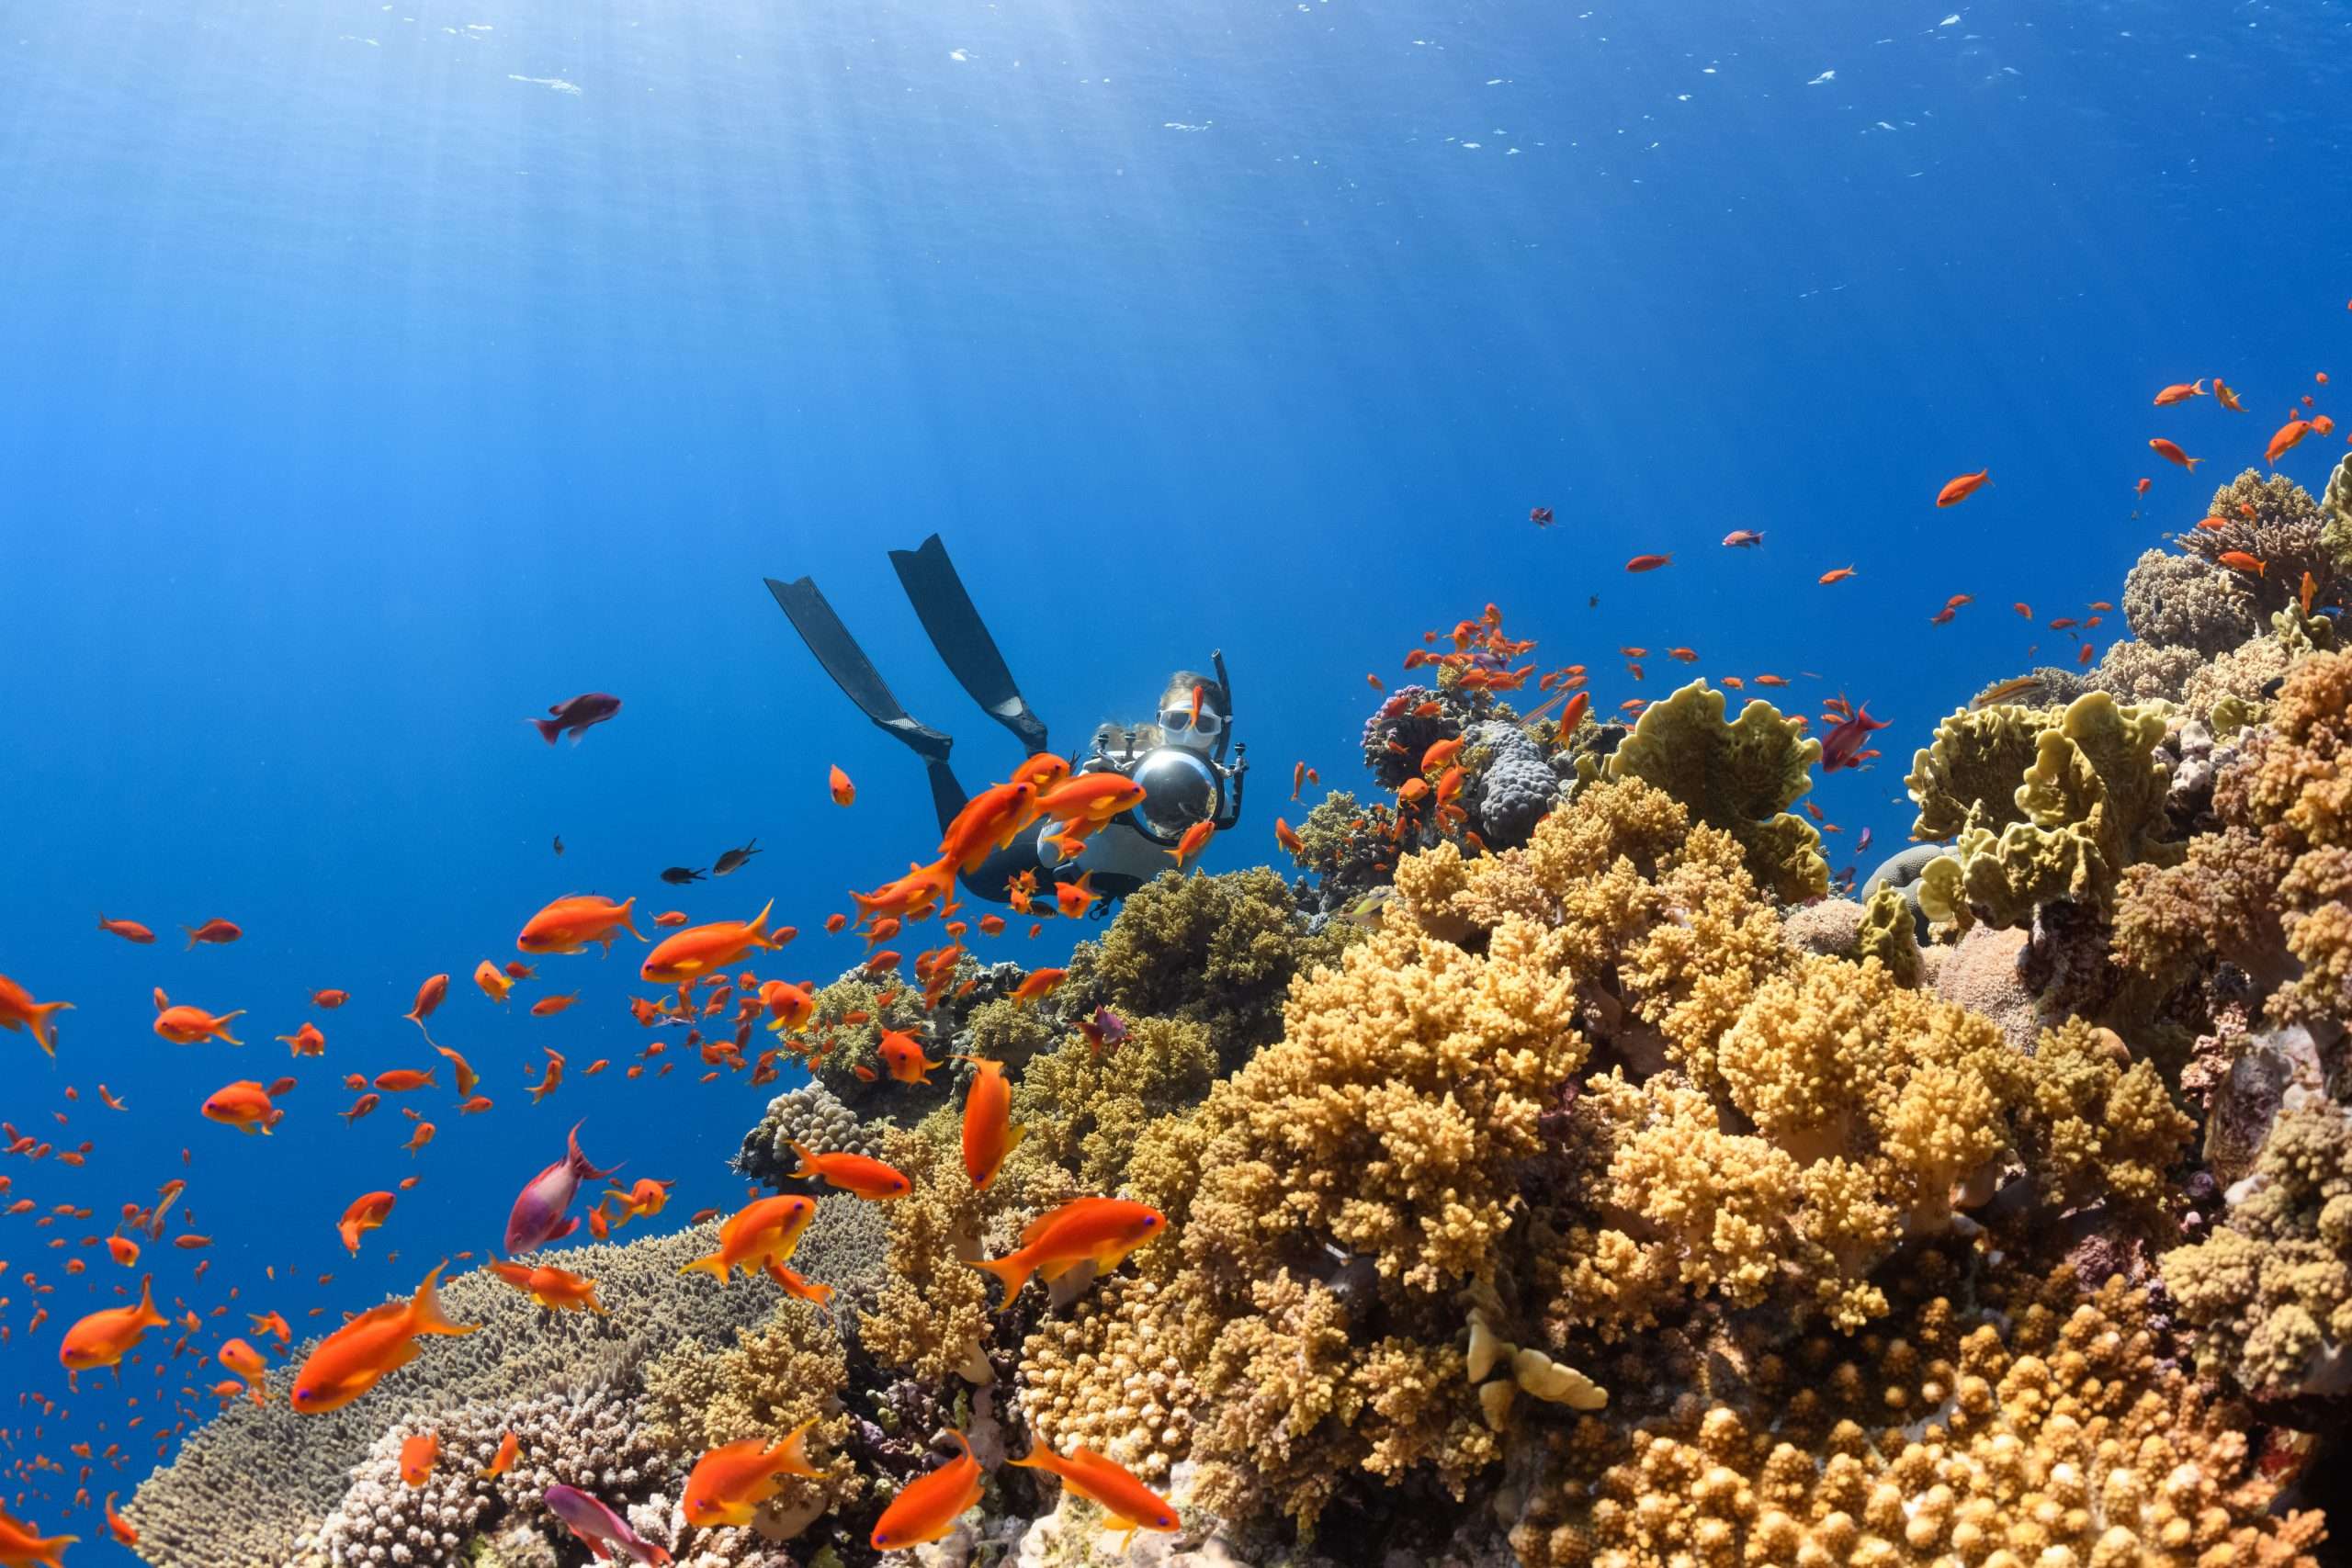 Scuba diving in coral reefs is a popular recreational activity for humans- this diver enjoys the beautiful school of fish supported by the colourful coral.